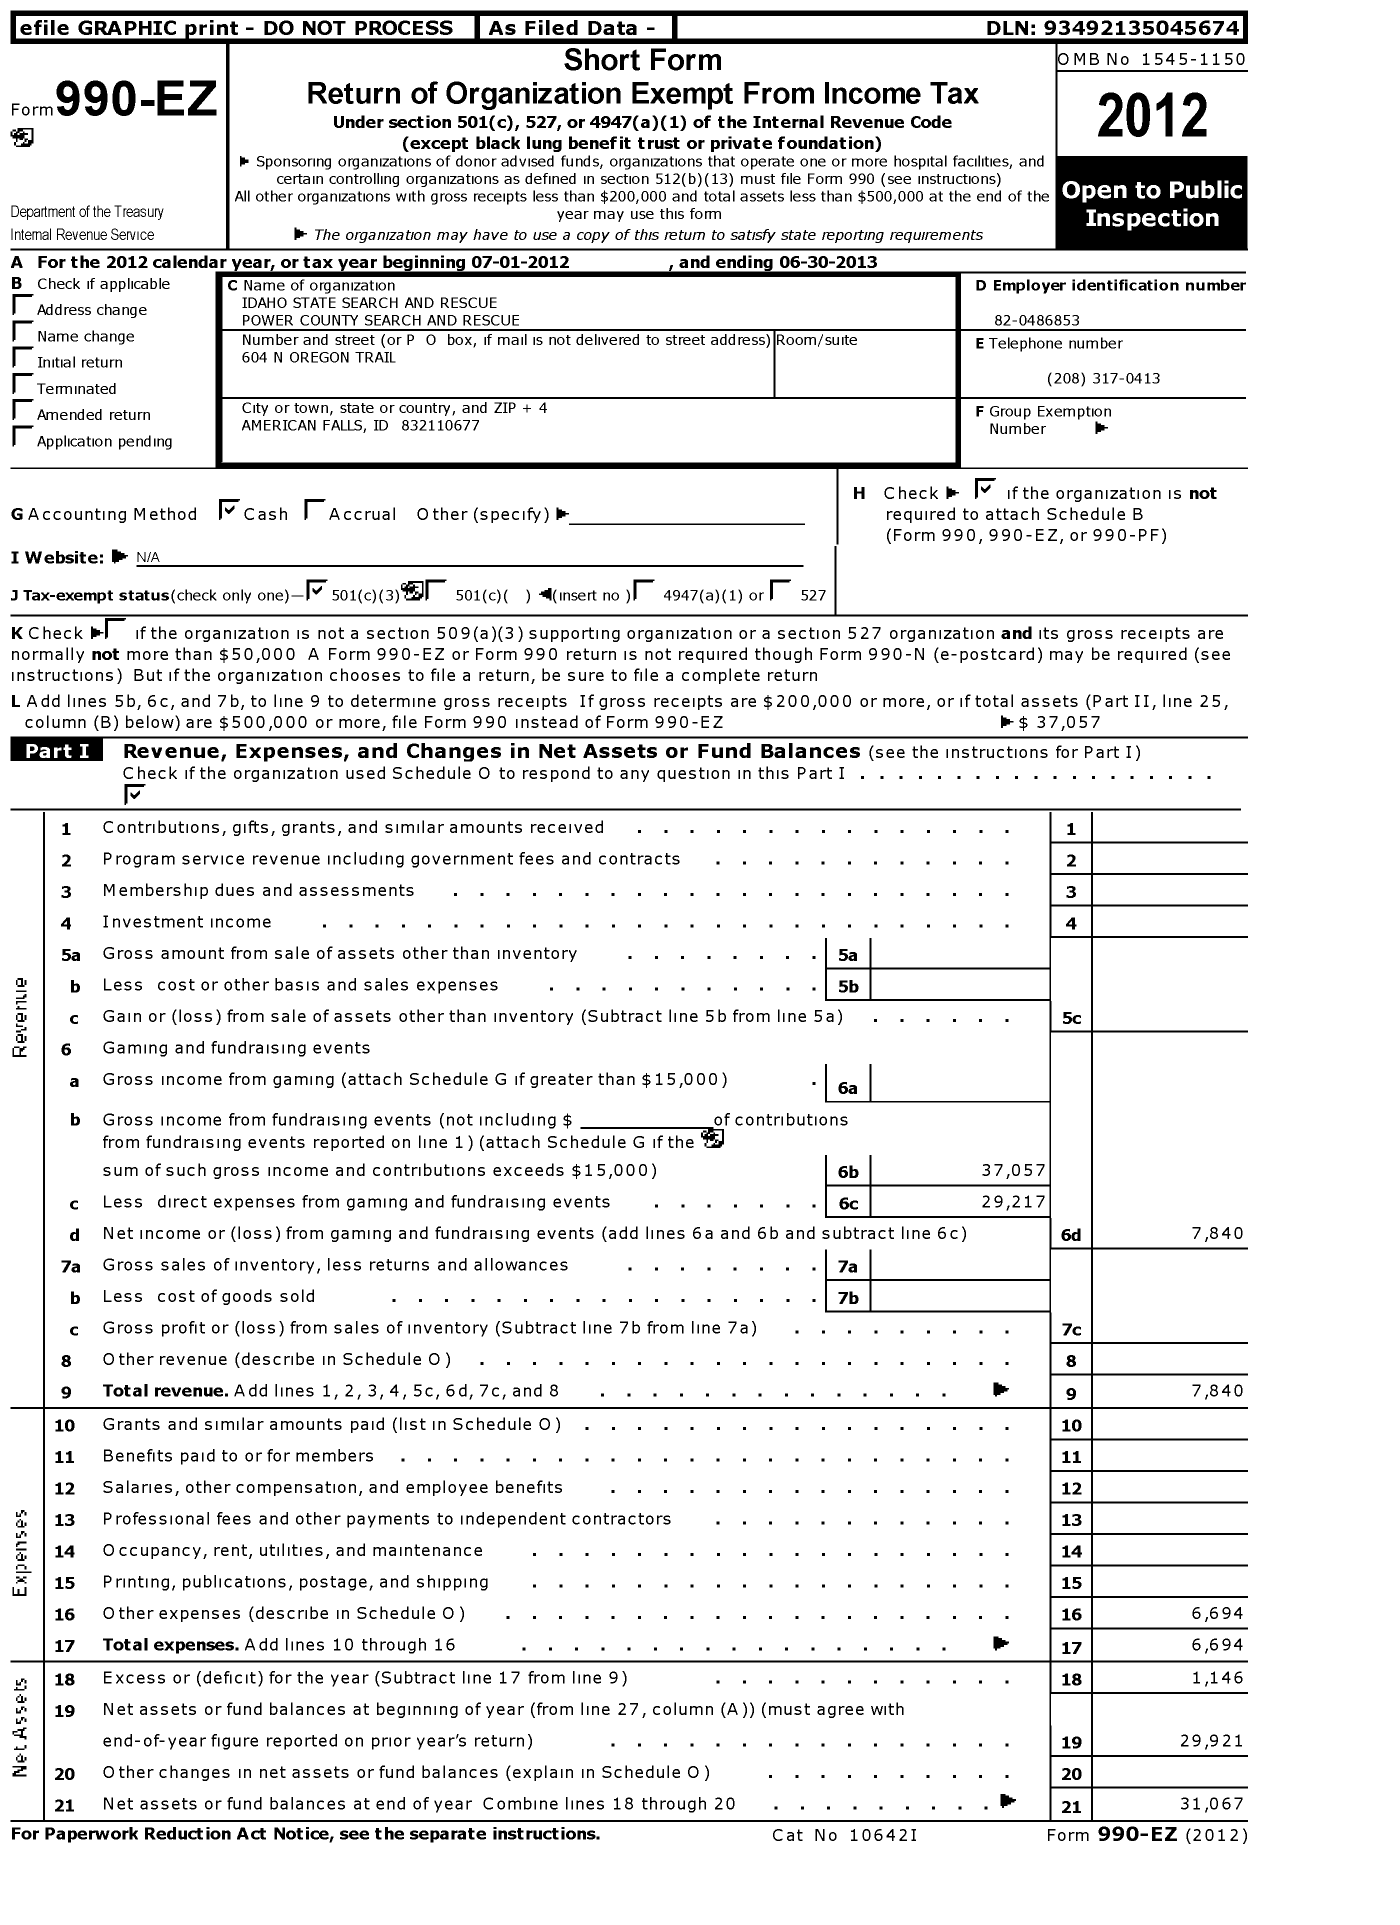 Image of first page of 2012 Form 990EZ for Idaho State Search and Rescue Power County Search and Rescue